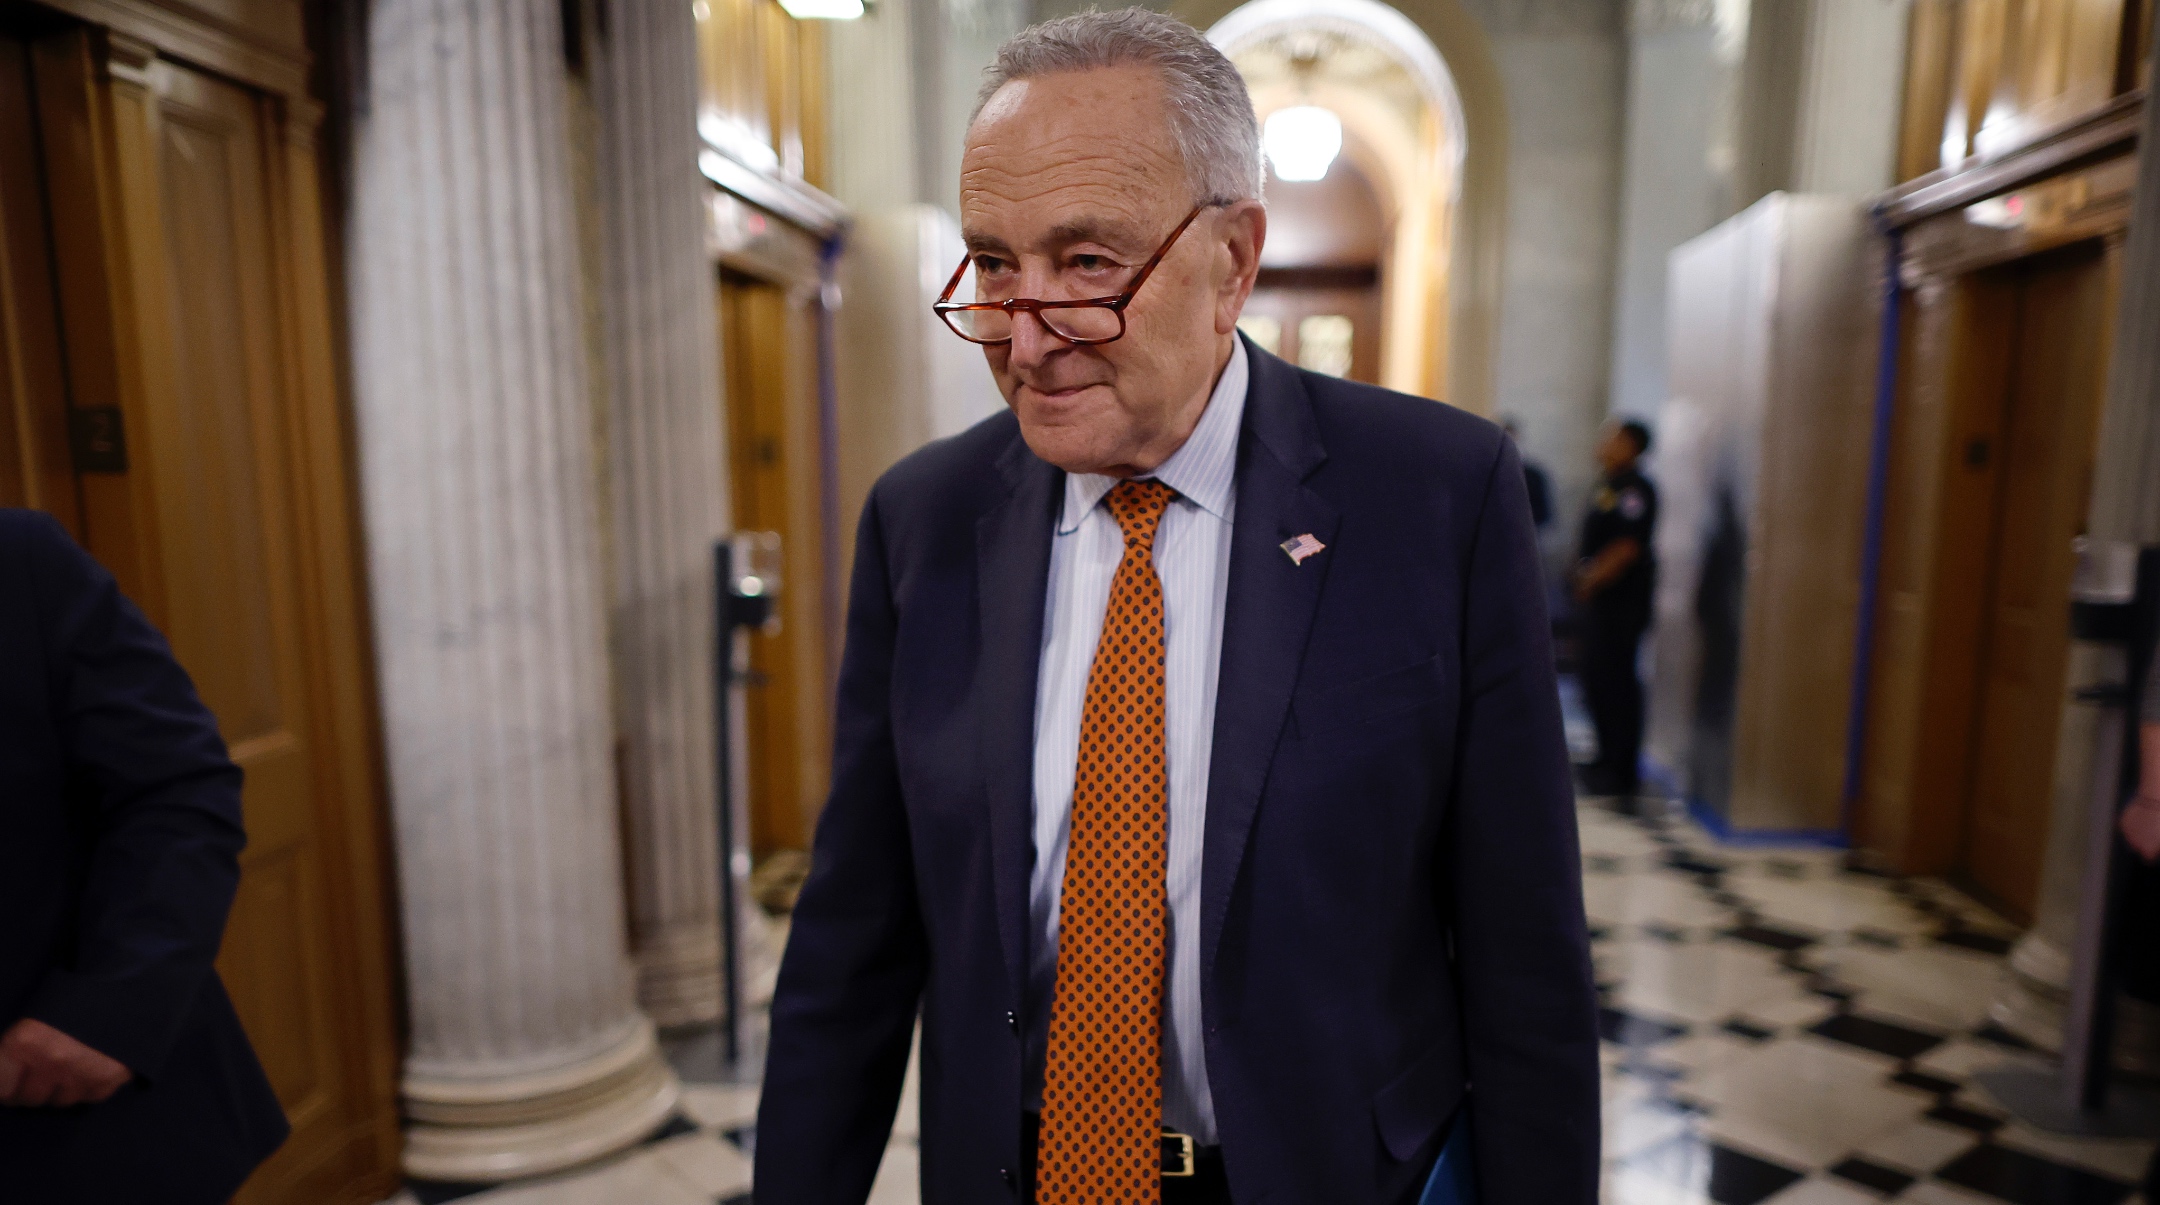 Chuck Schumer calls for new elections in Israel, says Netanyahu has ‘lost his way’